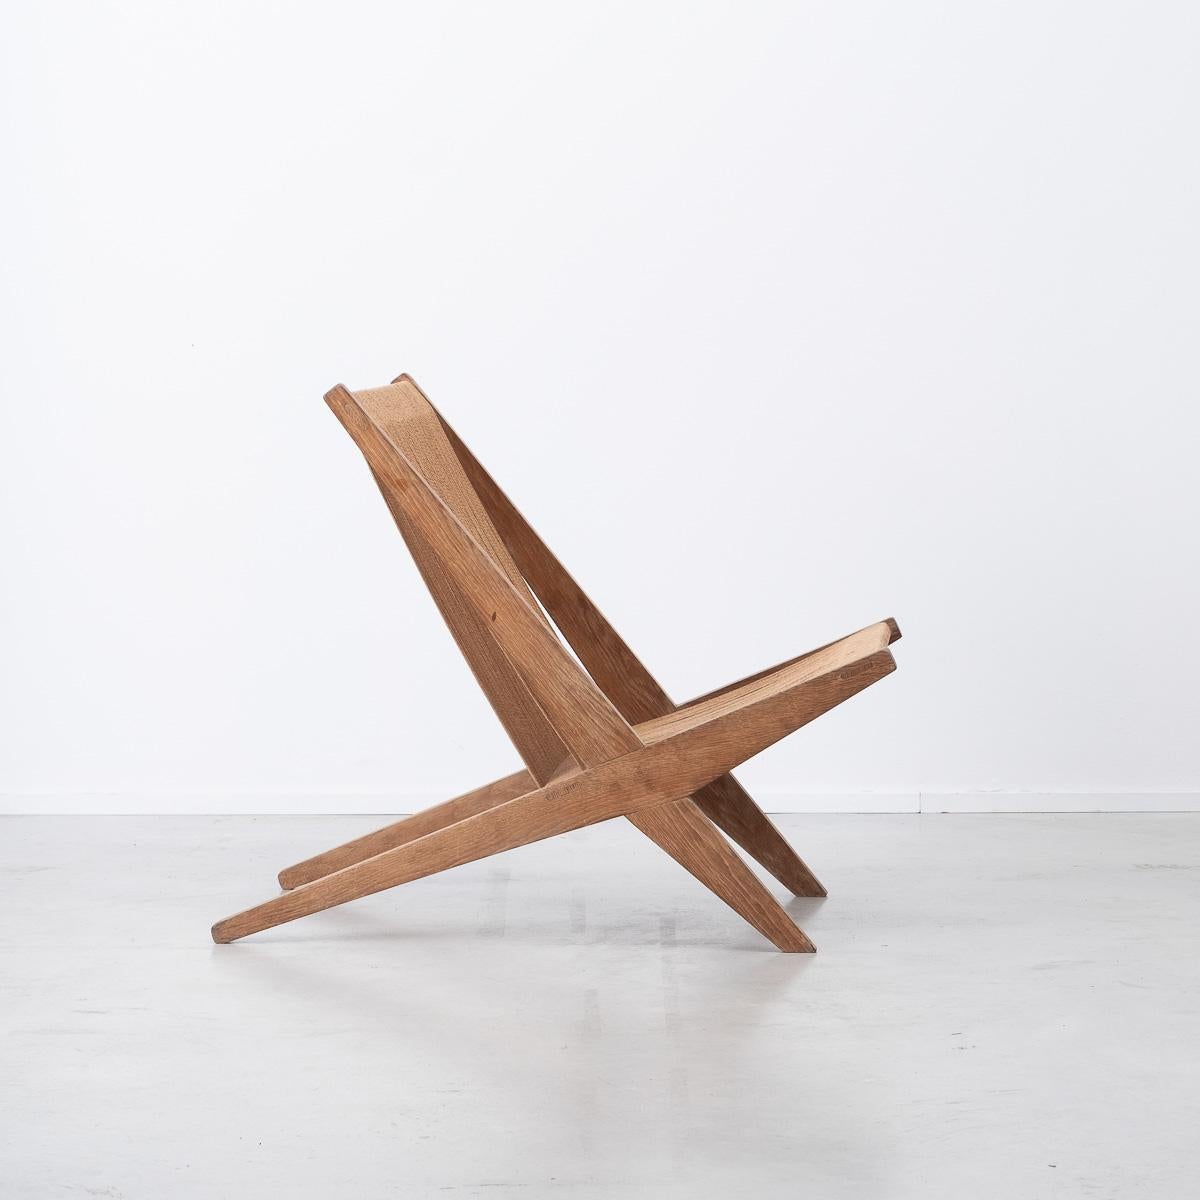 This sleek lounge chair is crafted from oak and bound by a rope seat and backrest. The angular frame cuts a modern profile, whilst the wood has aged nicely. Attributed to Poul Kjaerholm & Jørgen Høj for Thorald Madsen Snedkeri.

In very good